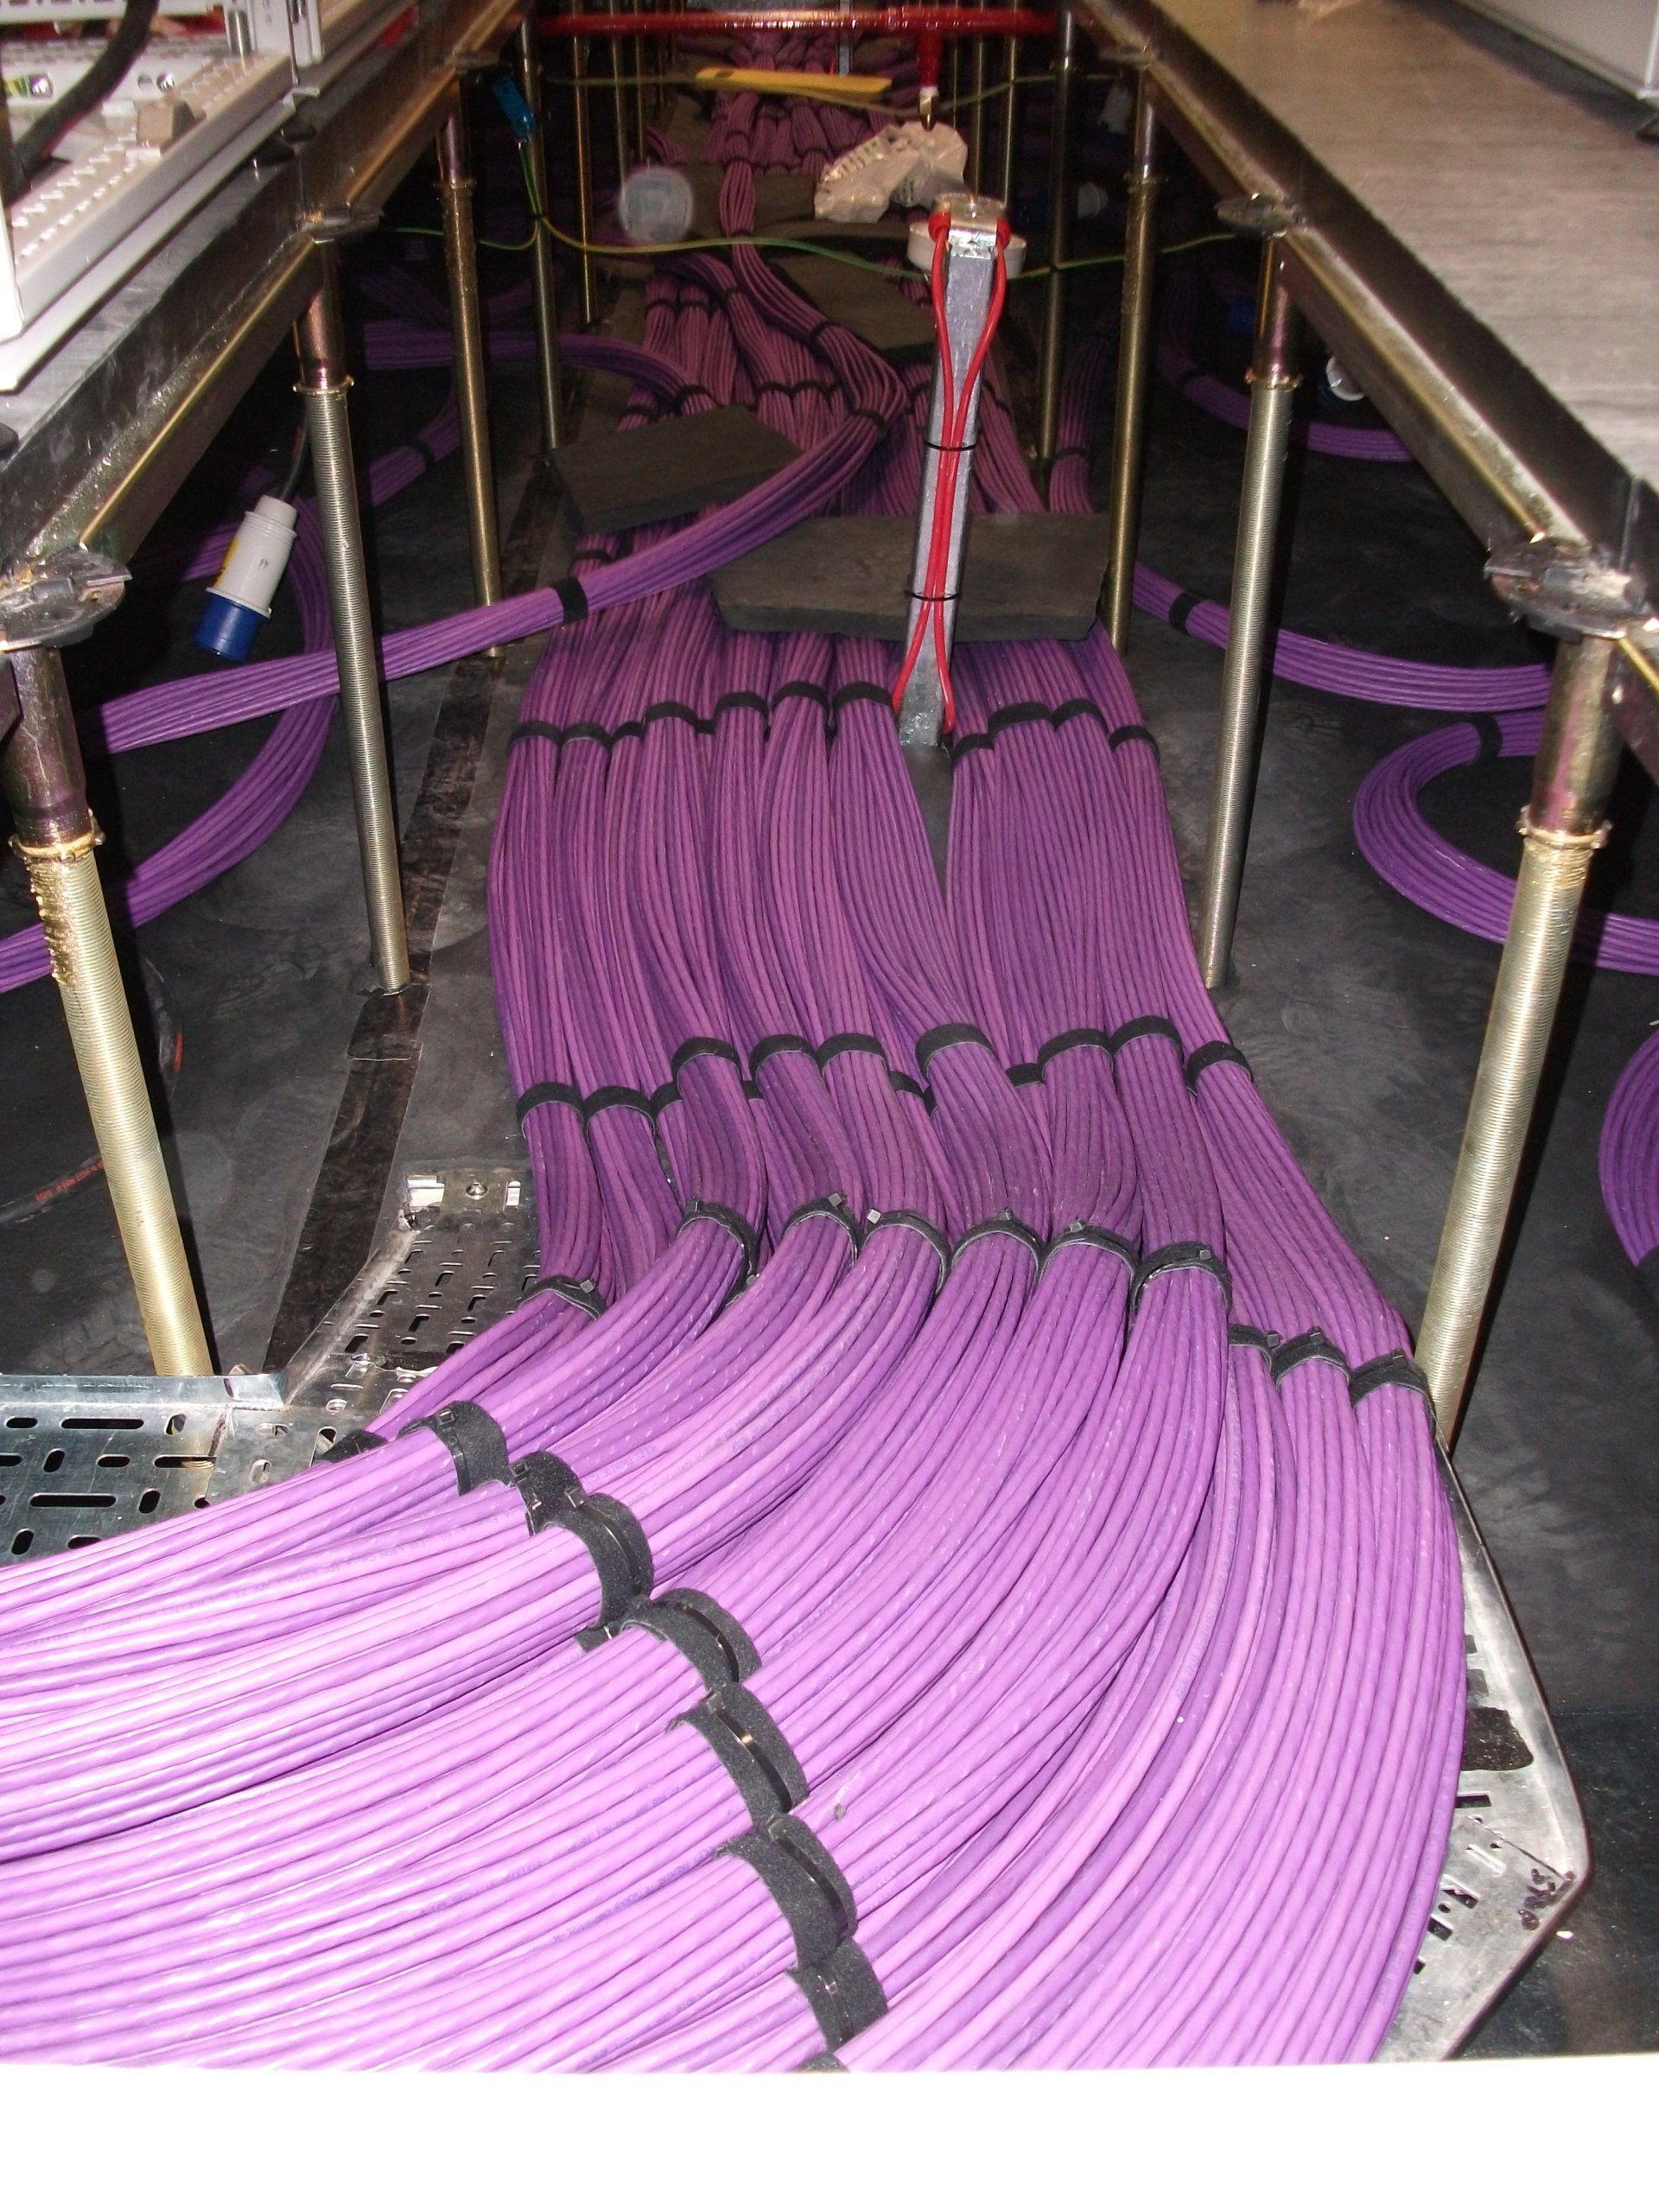 cables for data